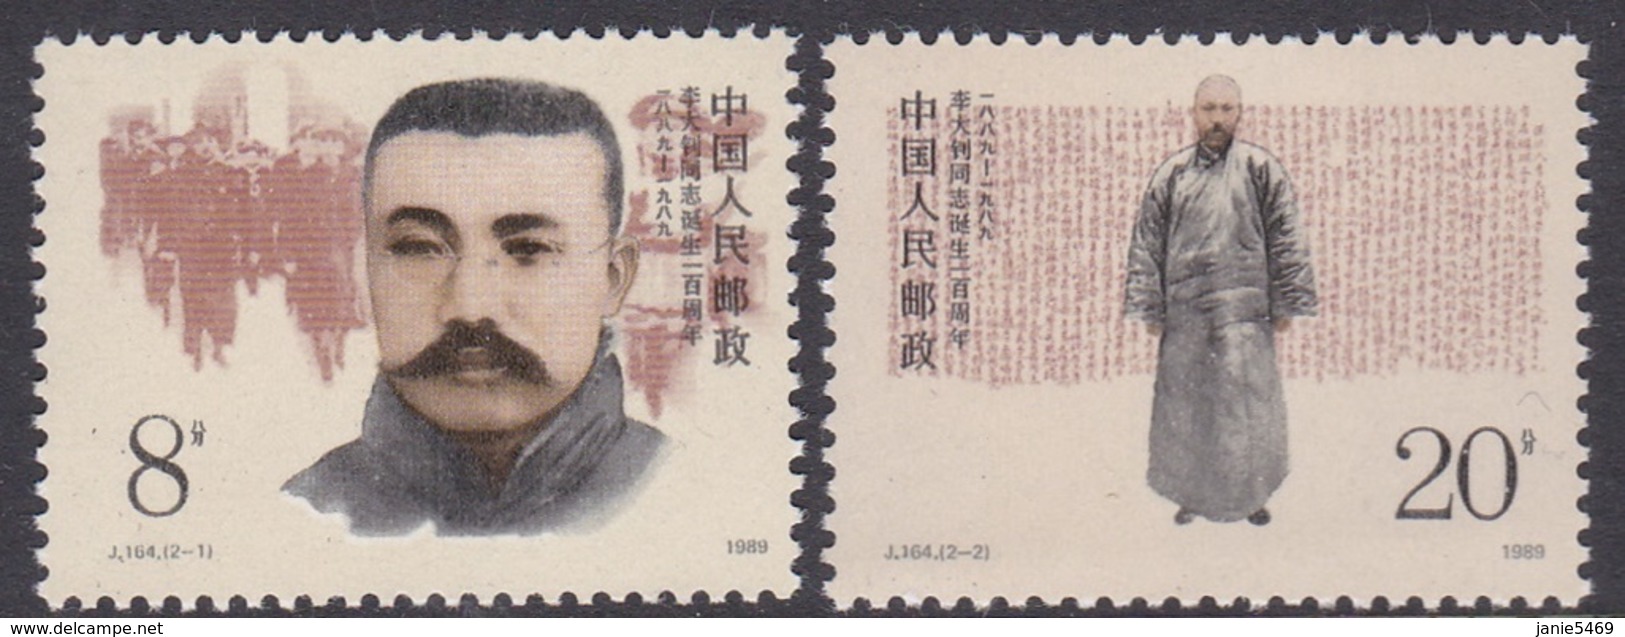 China People's Republic SG 3641-3642 1989 Birth Centenary Of Li Dazhao, Mint Never Hinged - Unused Stamps